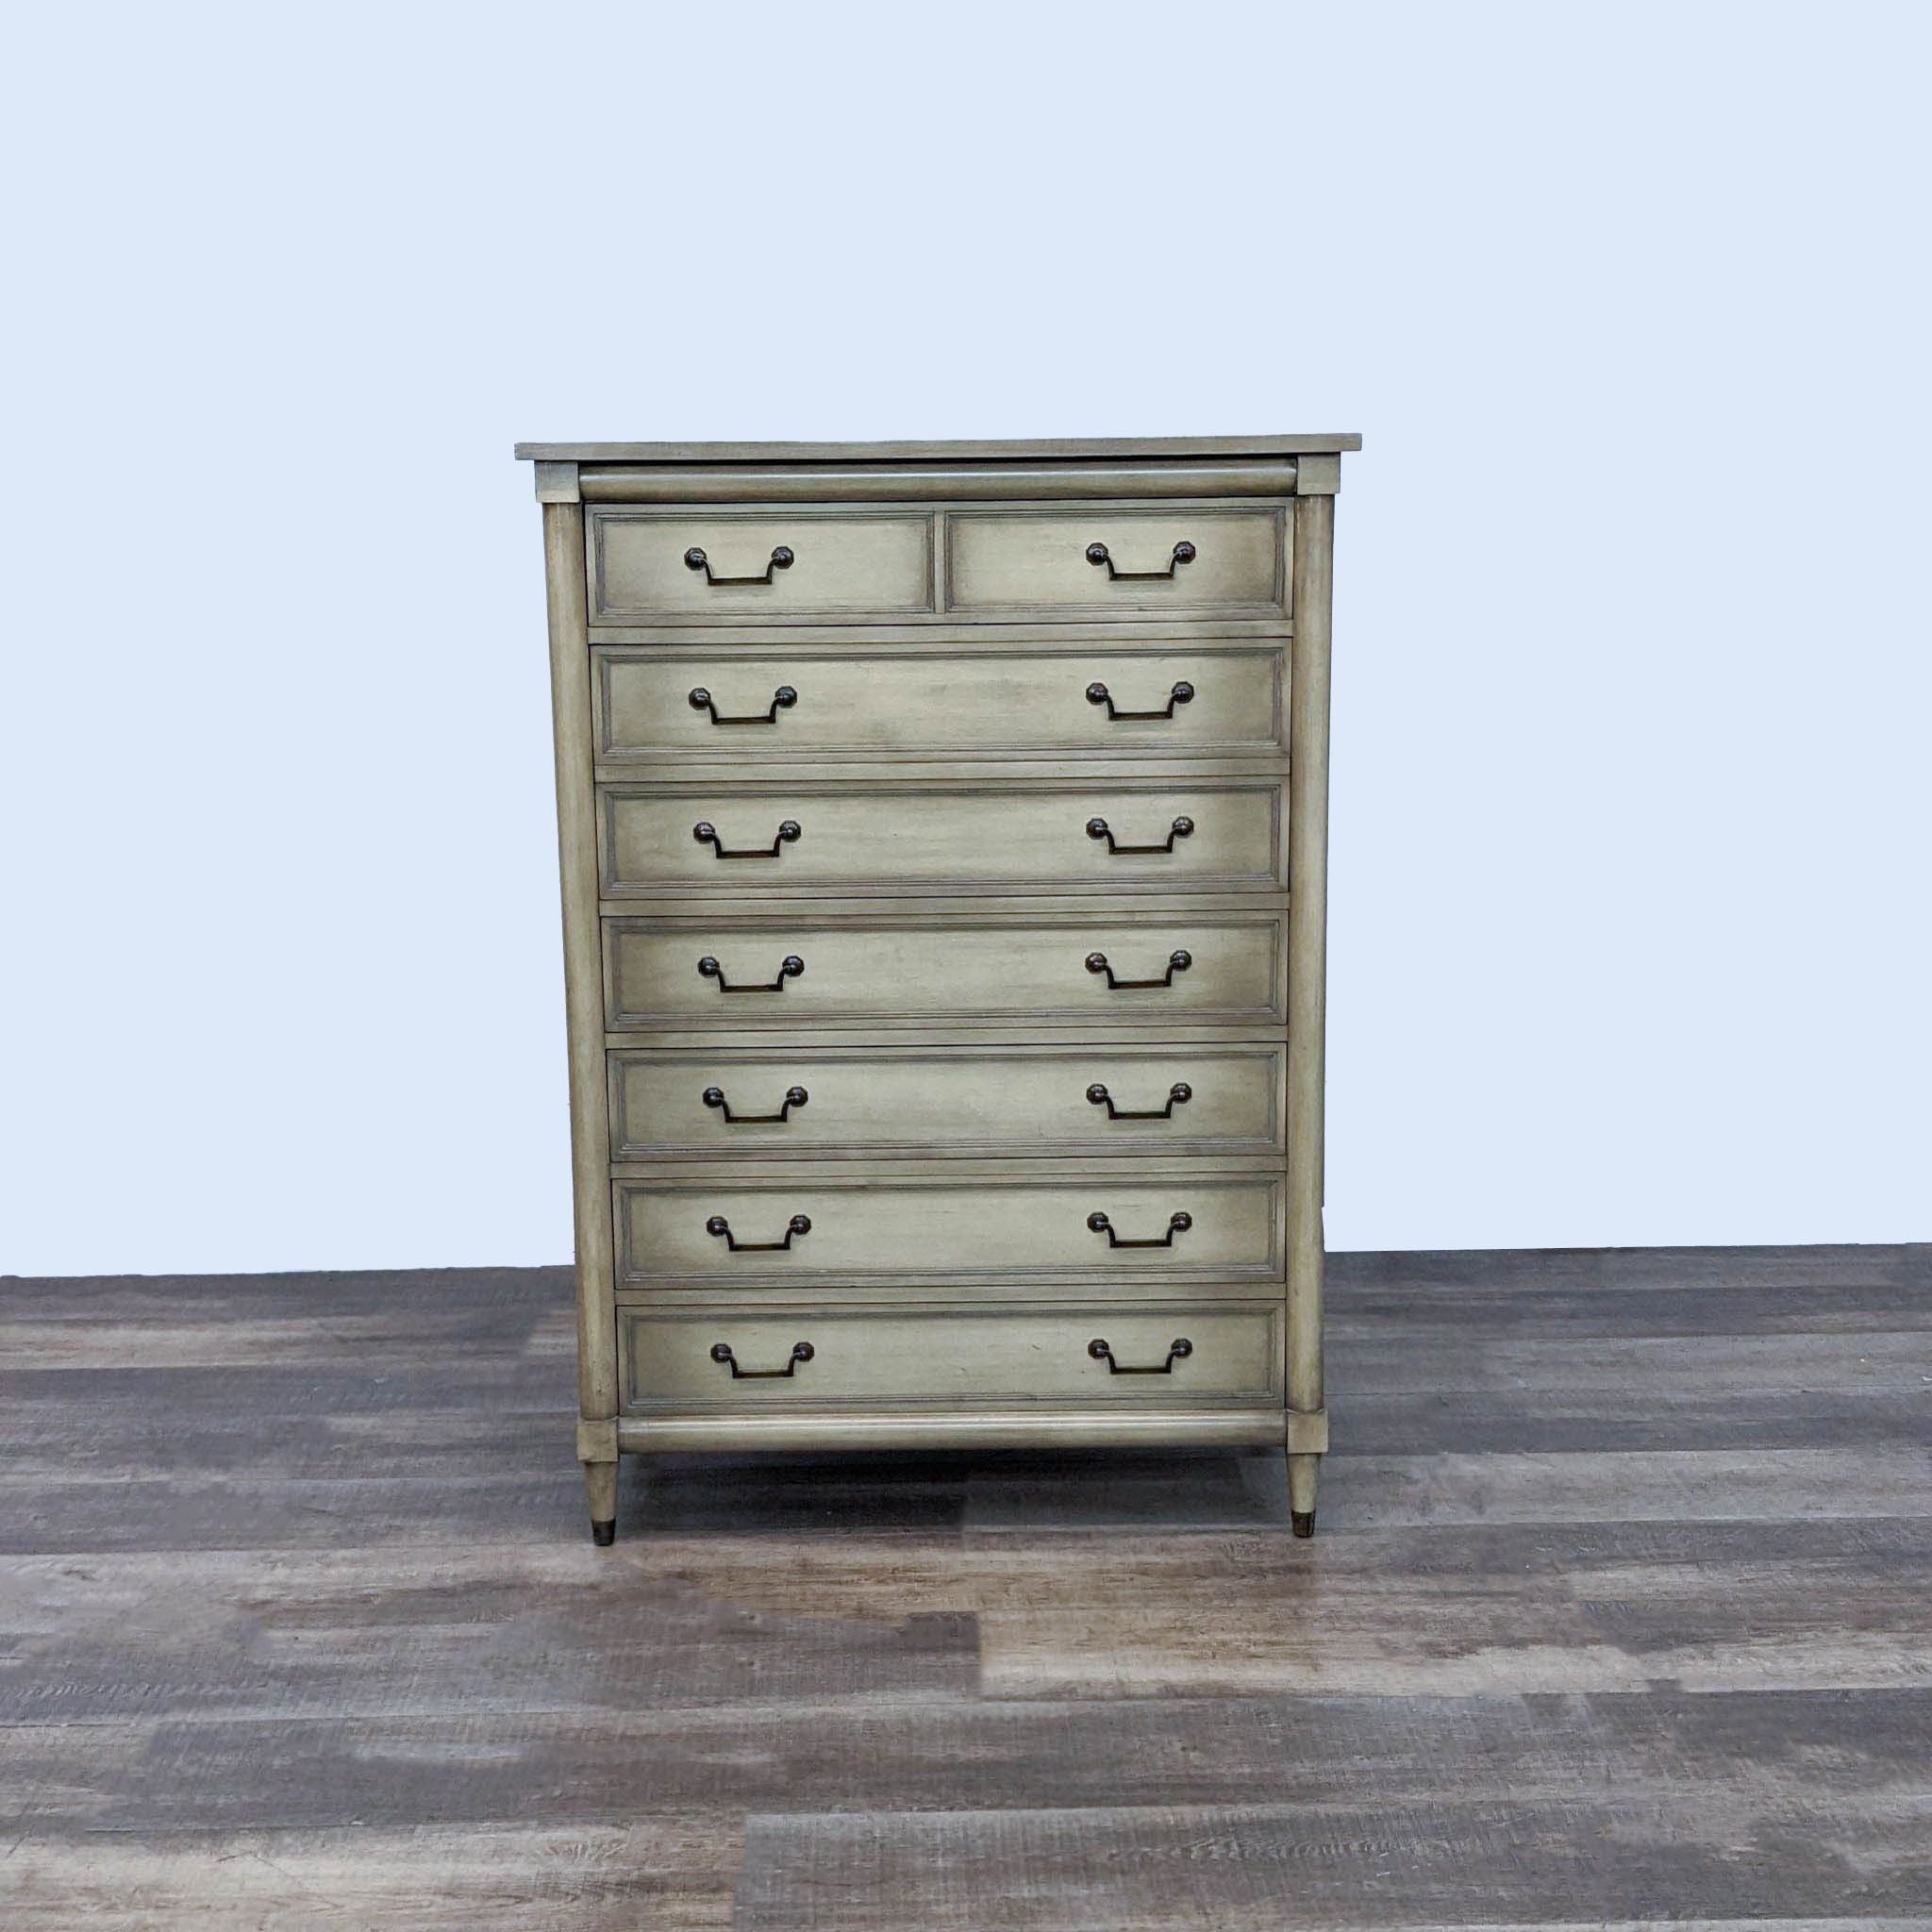 Alt text 1: A vintage wooden Reperch dresser with six drawers and antiqued handles, in a country cottage style, against a neutral background.